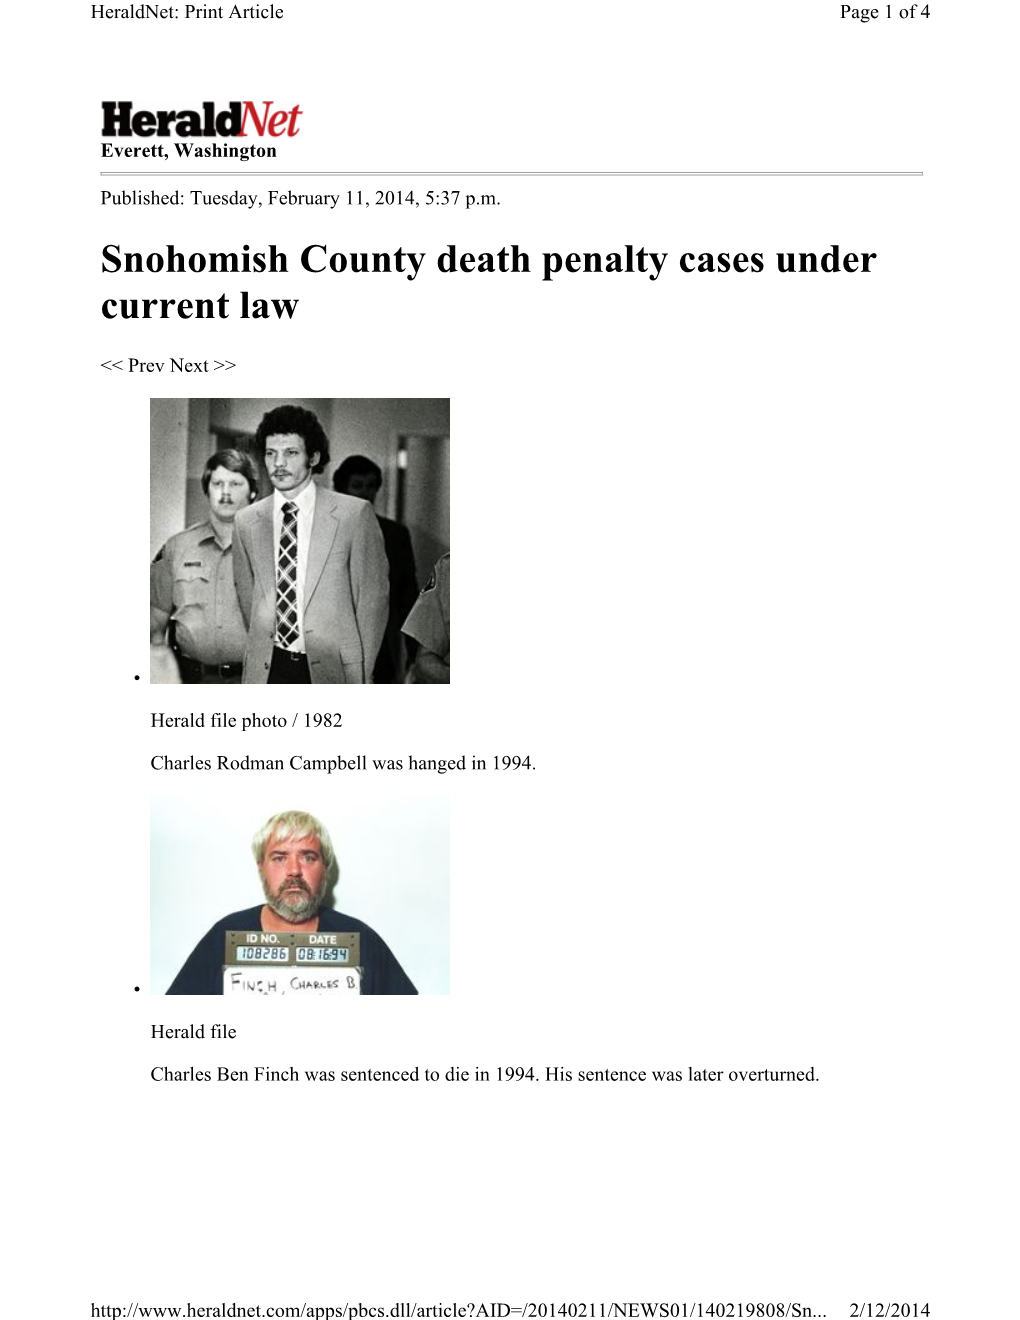 Snohomish County Death Penalty Cases Under Current Law